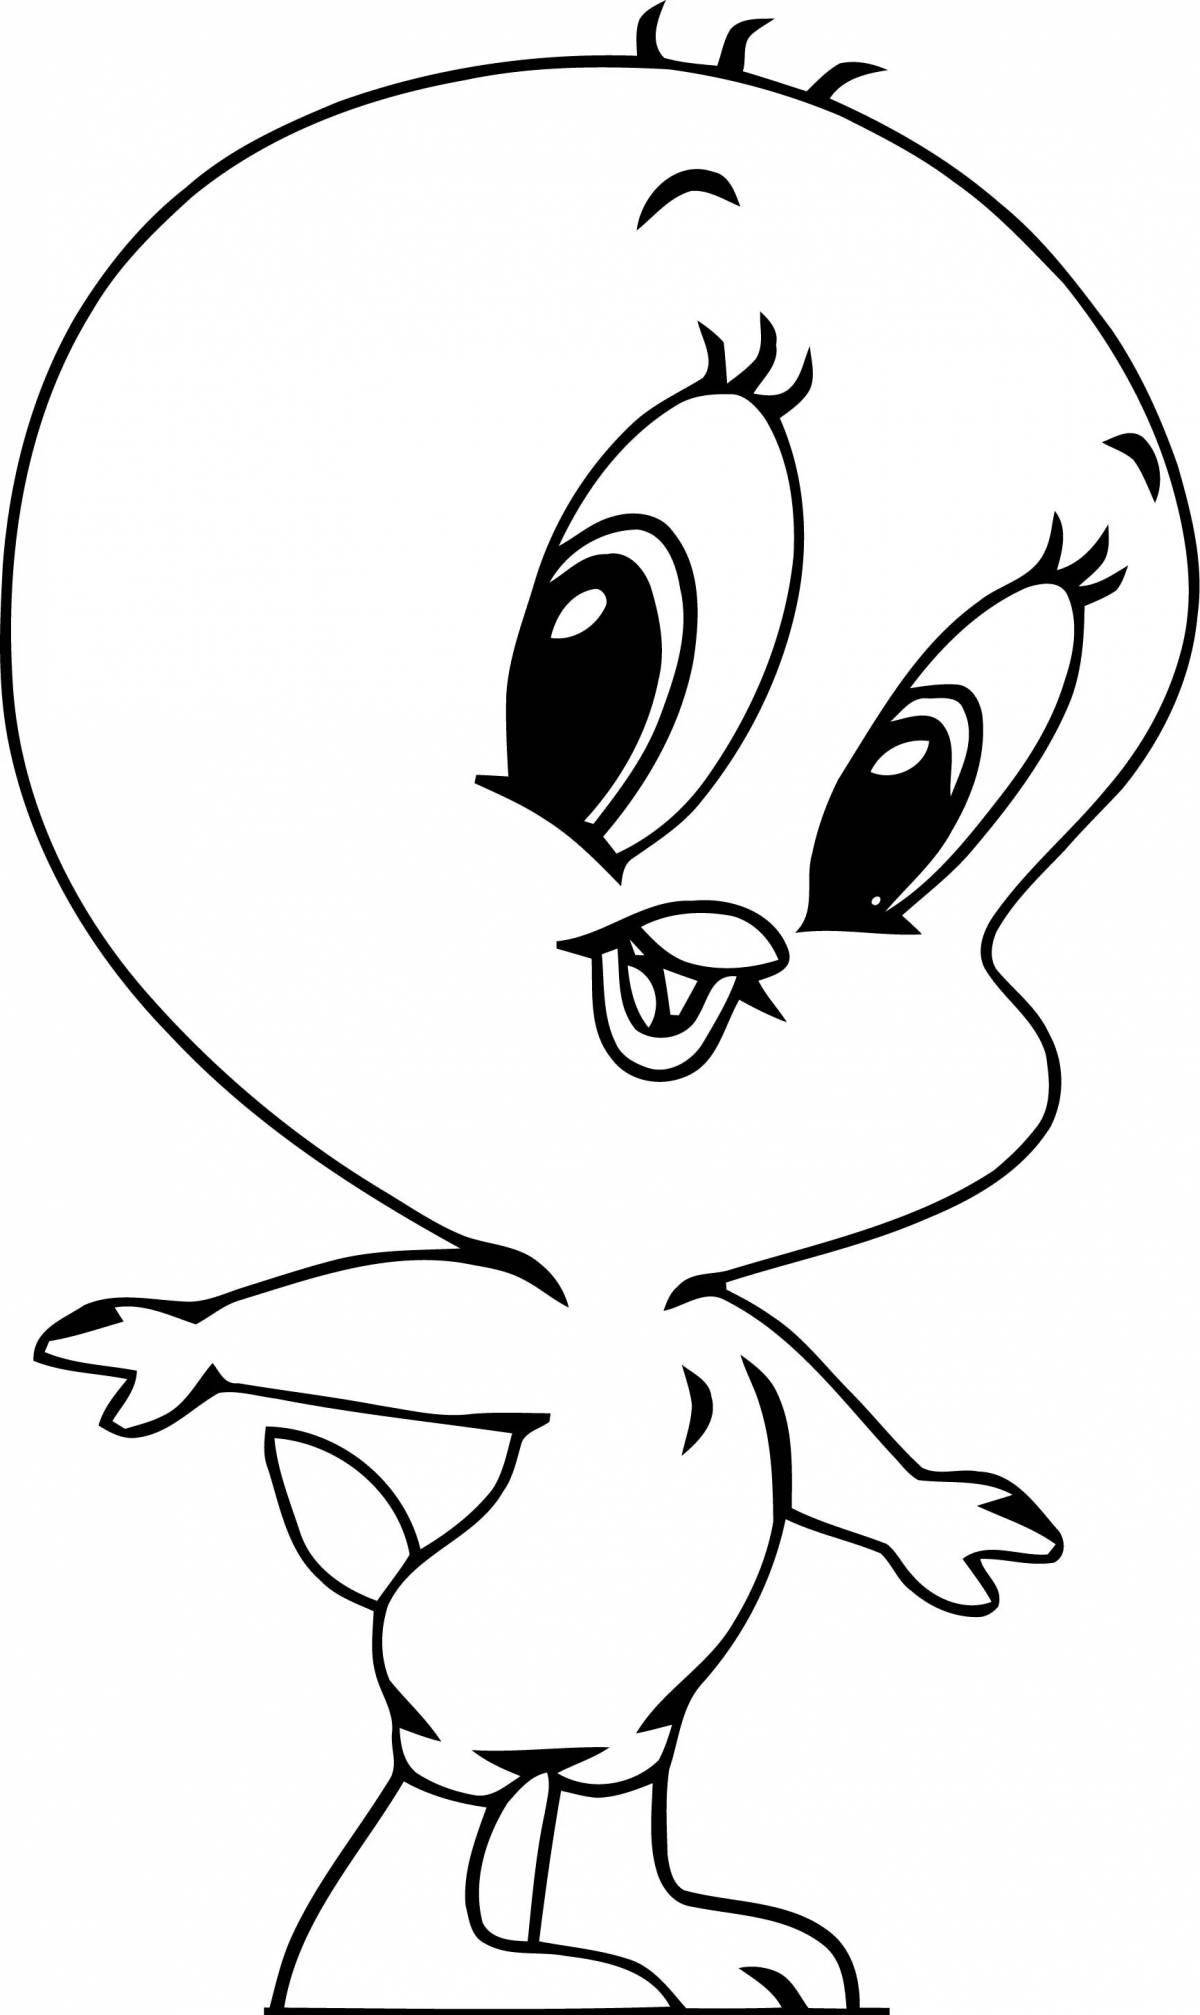 Adorable cartoon character coloring page